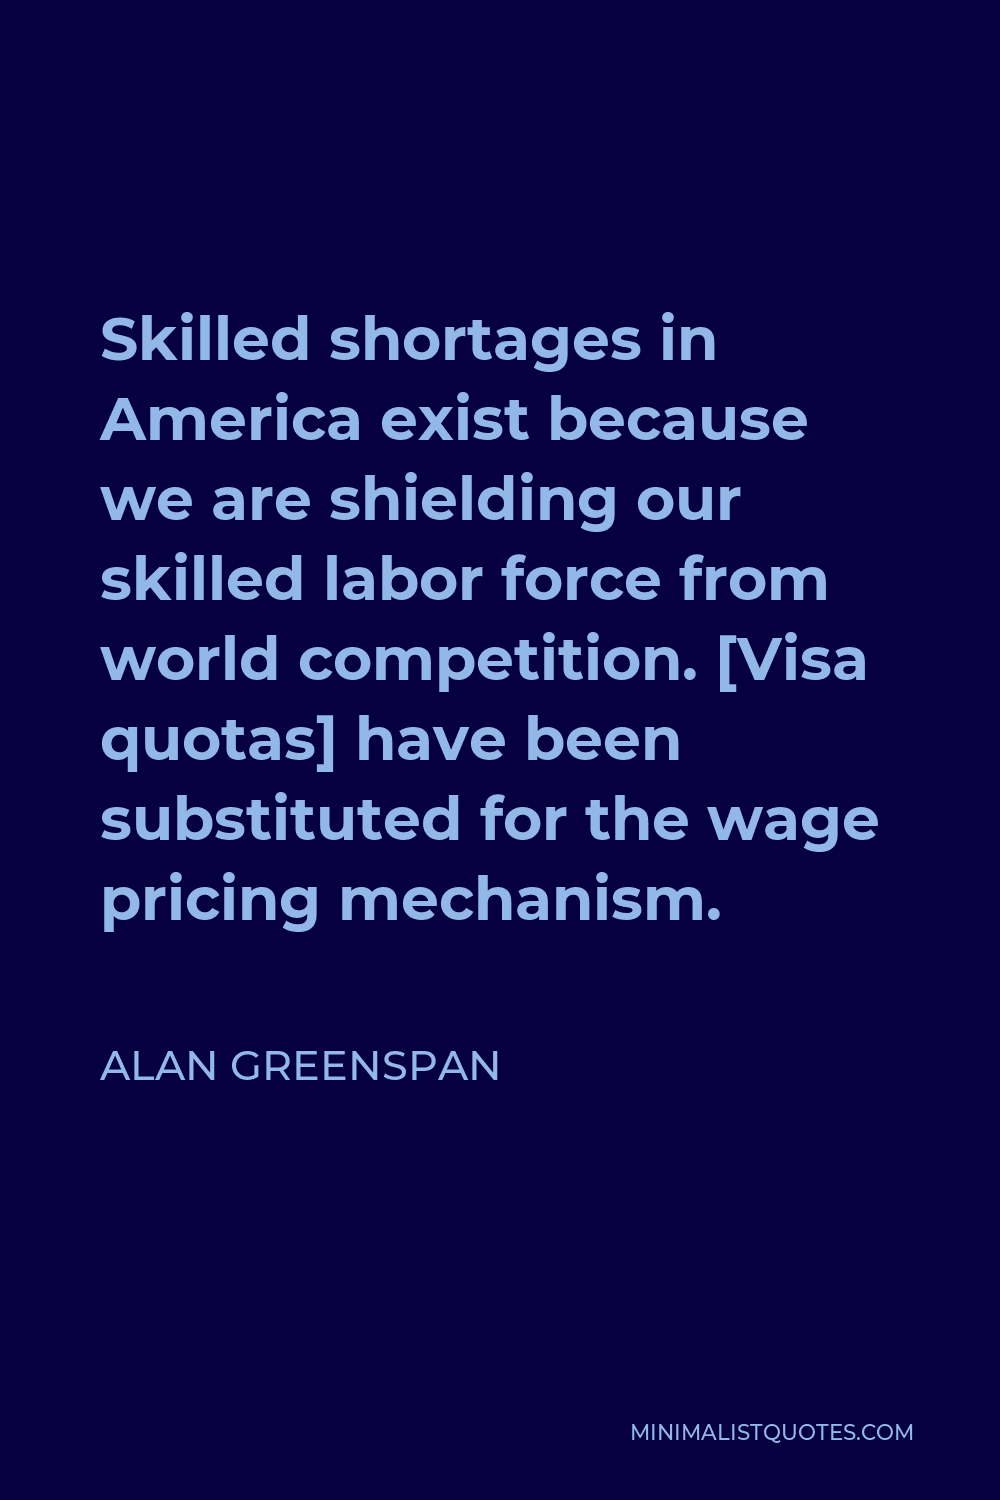 Alan Greenspan Quote - Skilled shortages in America exist because we are shielding our skilled labor force from world competition. [Visa quotas] have been substituted for the wage pricing mechanism.